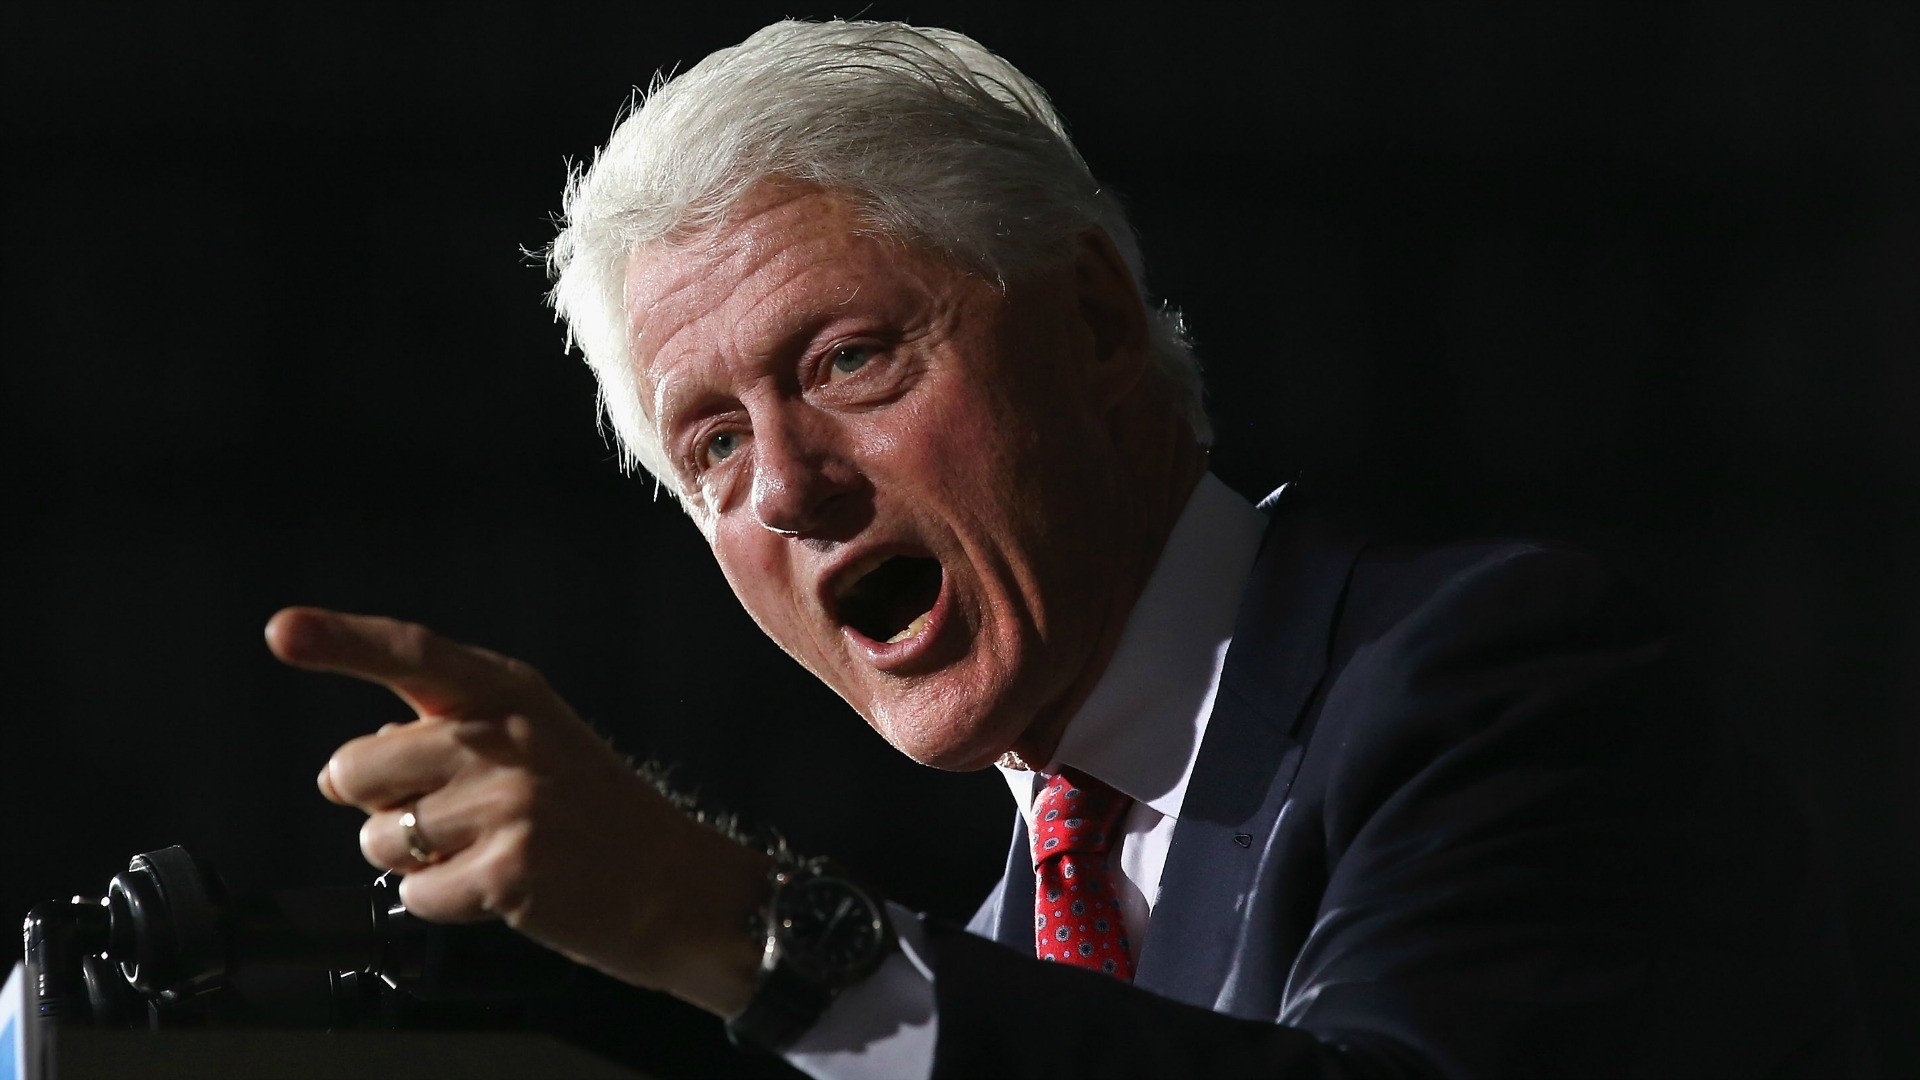 Full 100% Quality HD Images: Bill Clinton Wallpapers, px